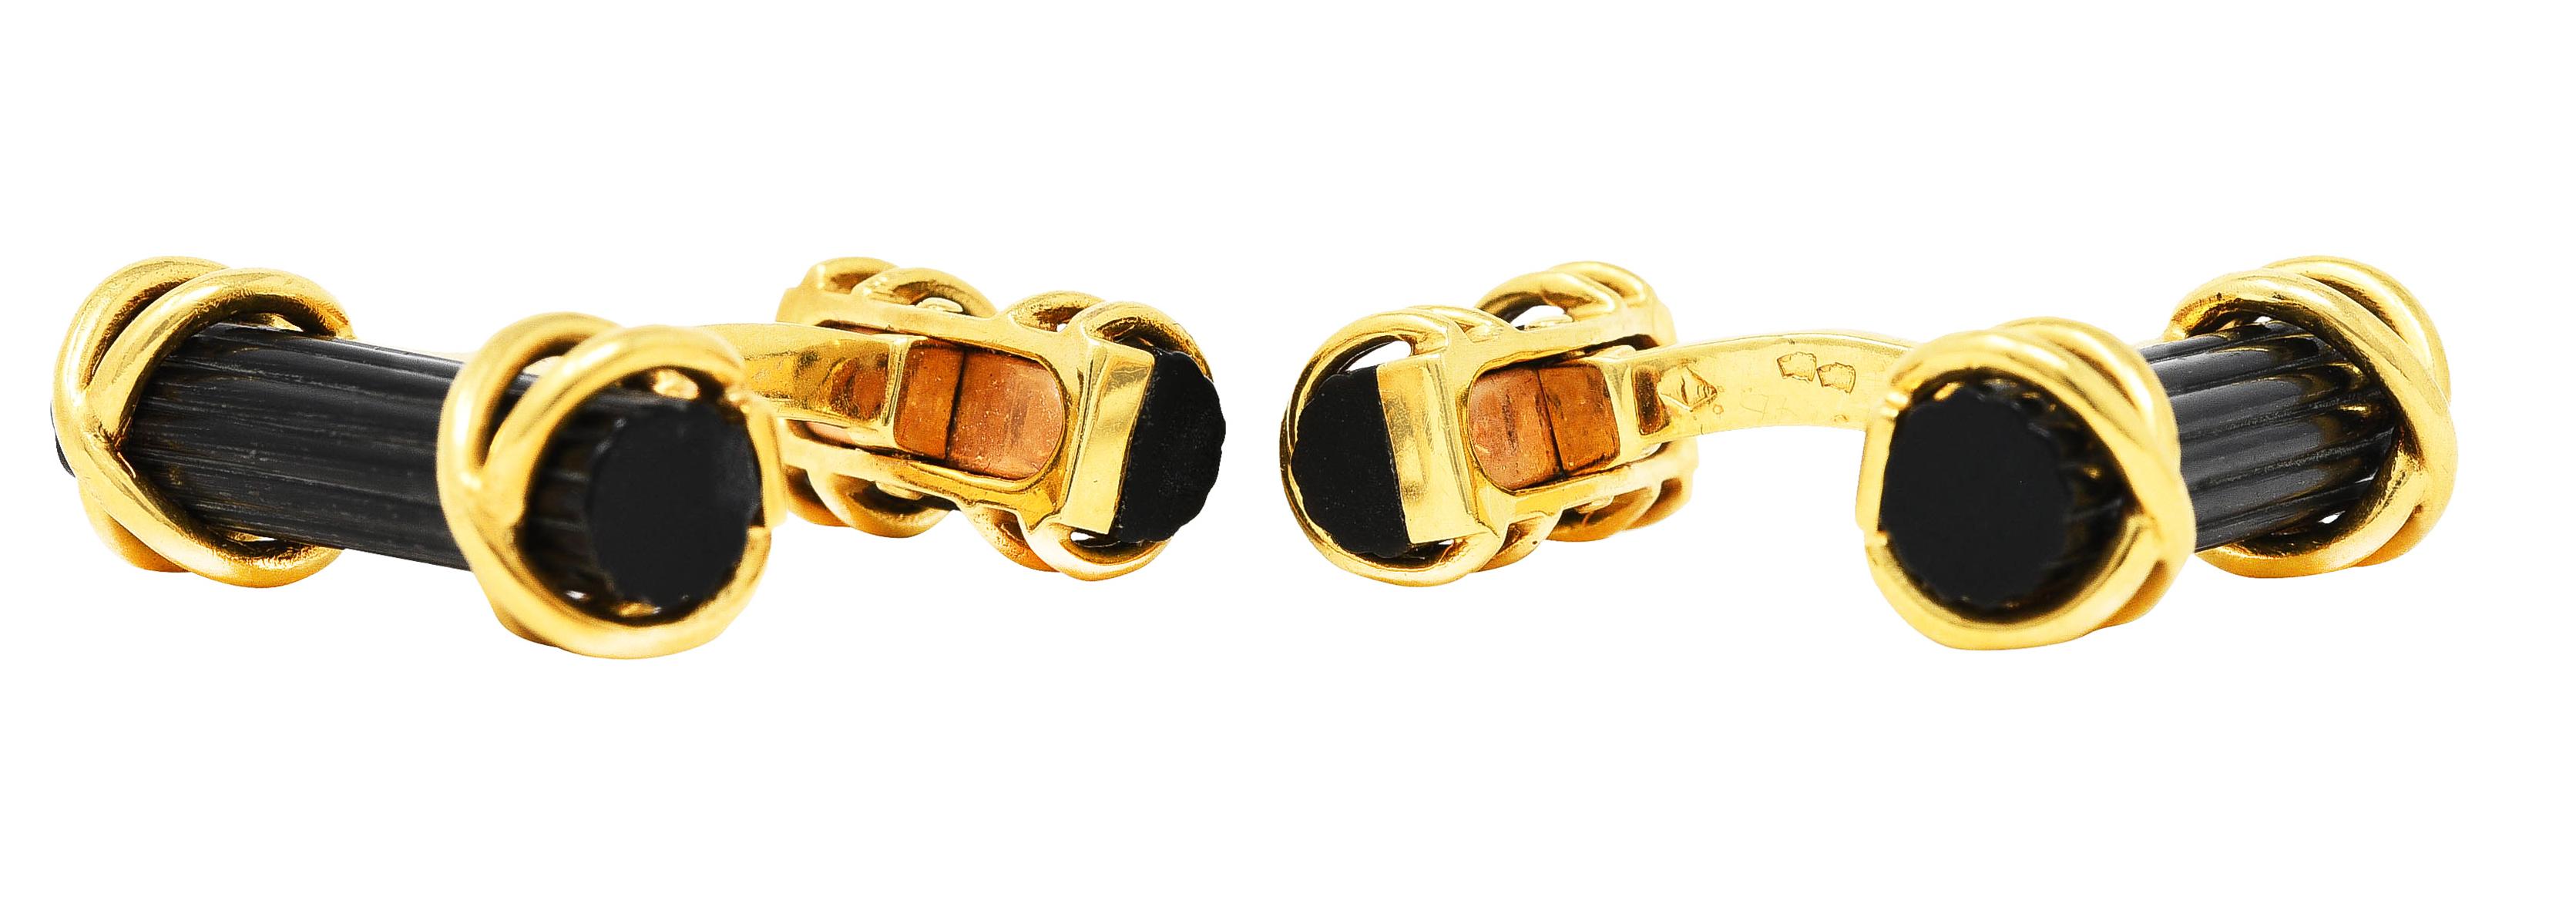 Tiffany & Co. French Carved Horn 18 Karat Yellow Gold Vintage Men's Cufflinks 3